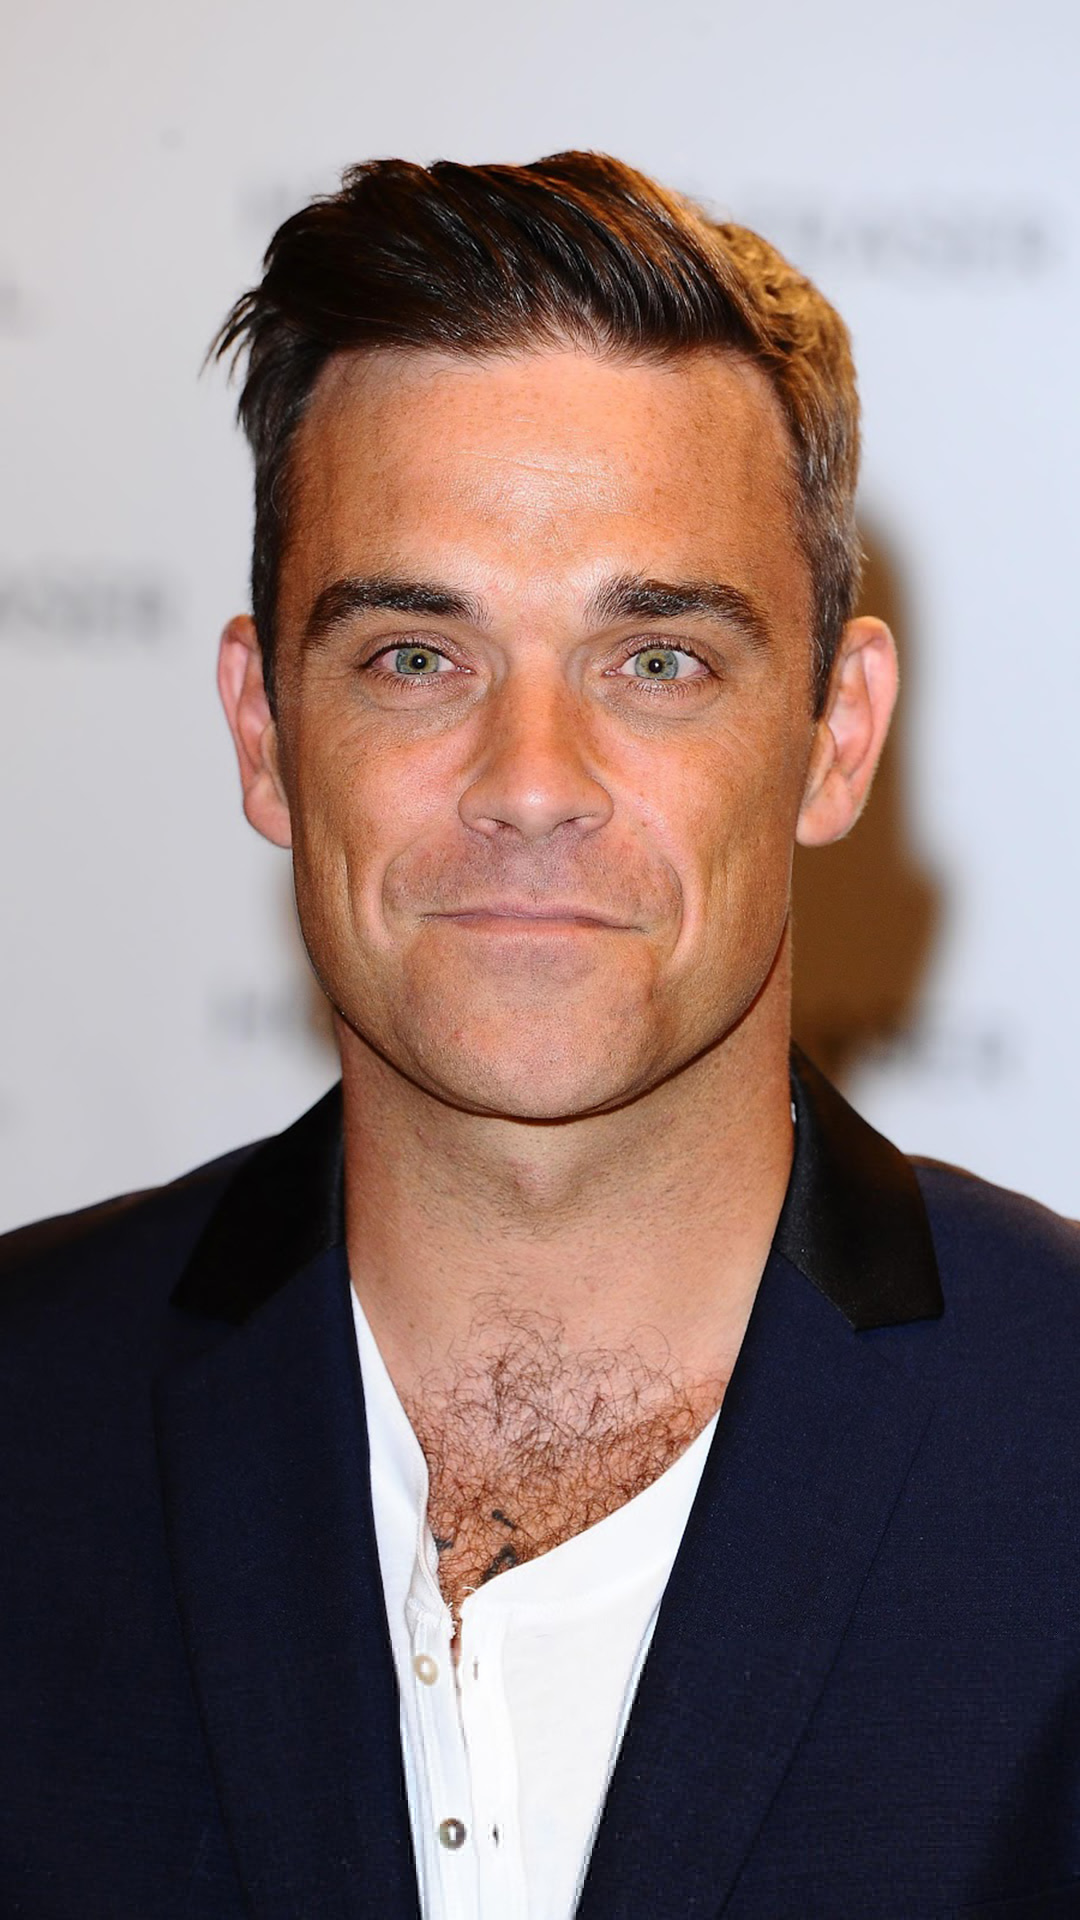 Robbie Williams, 4K wallpapers, Free download, Easy access, 1080x1920 Full HD Handy